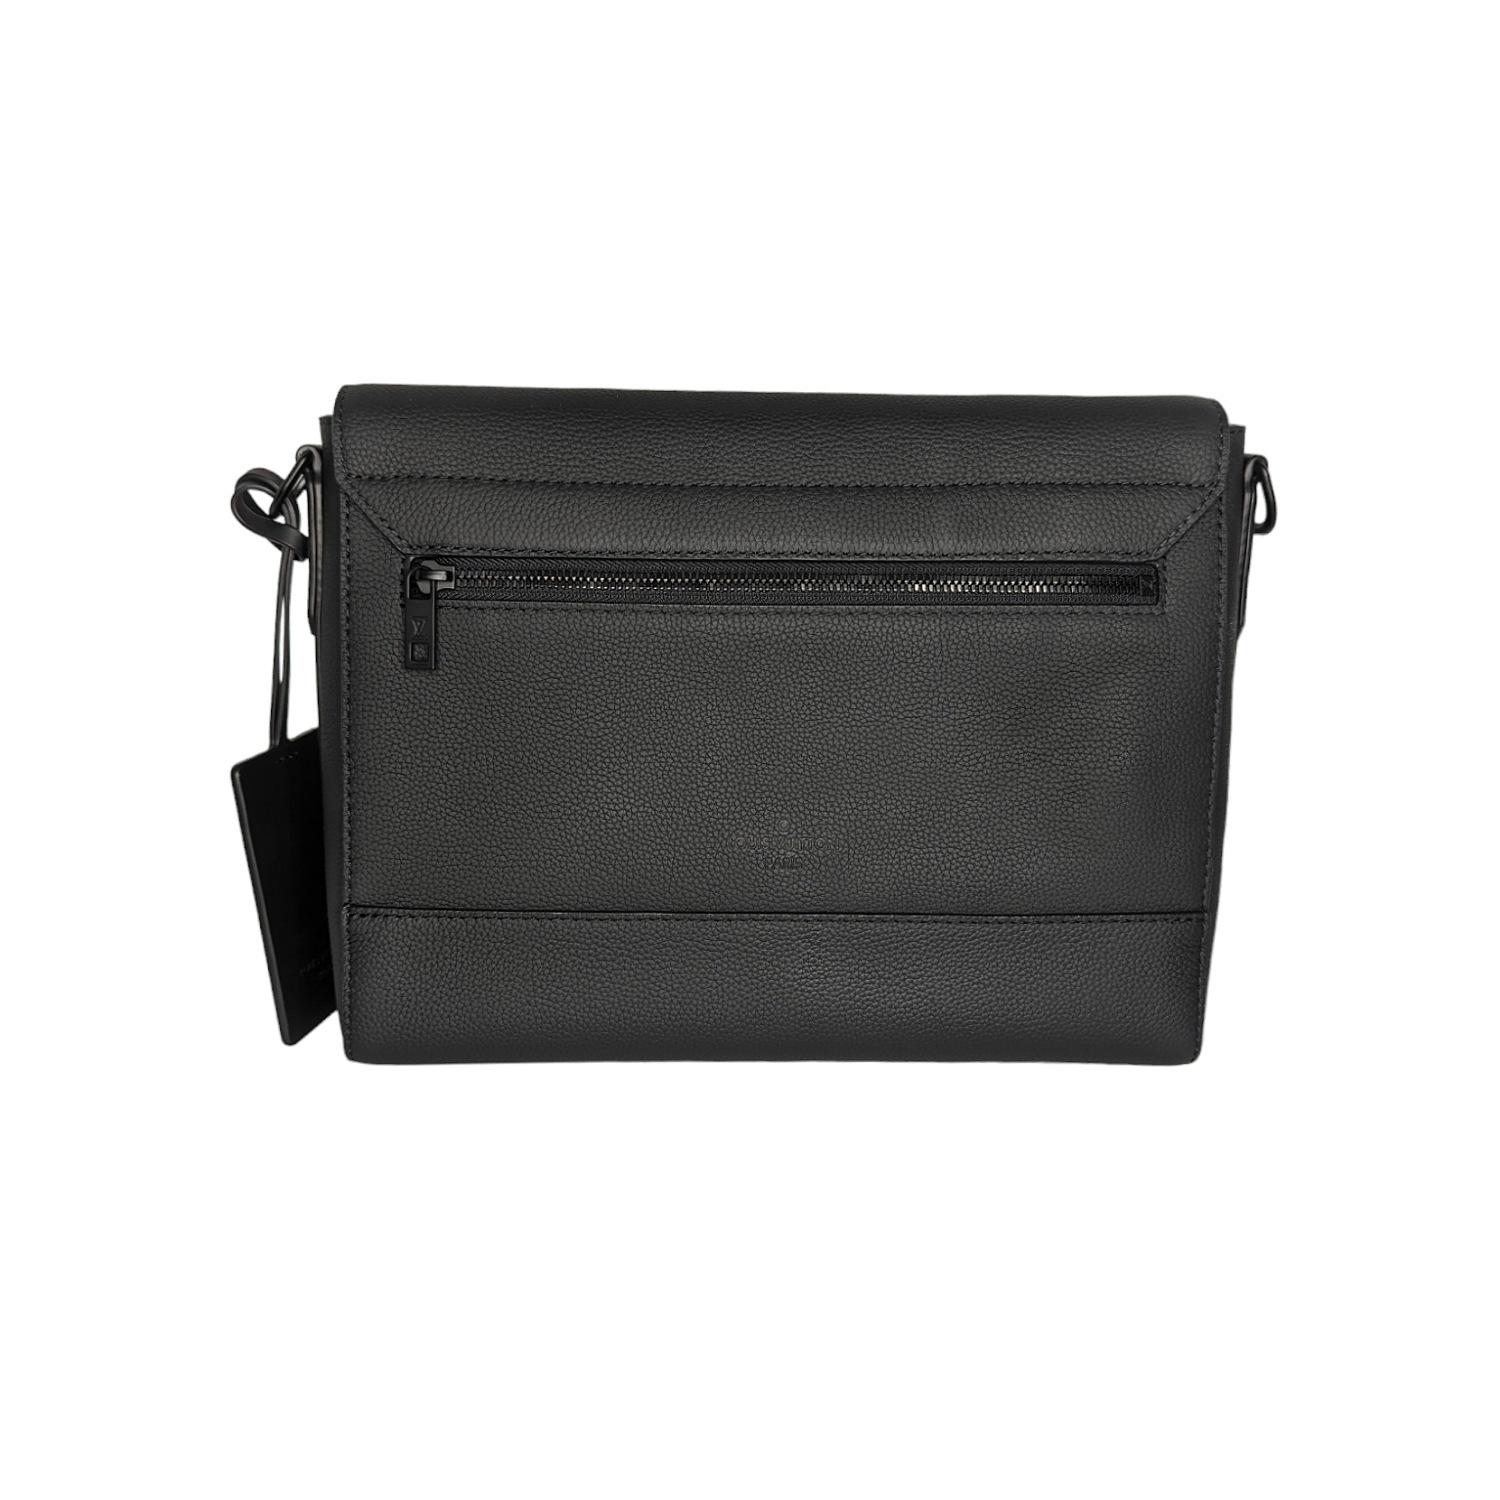 This chic messenger bag is crafted of black grained calfskin leather. The bag features a full front flap with black hardware LV on the bottom corner, a rear zipper pocket, black cowhide leather trim and a long canvas crossbody strap with black